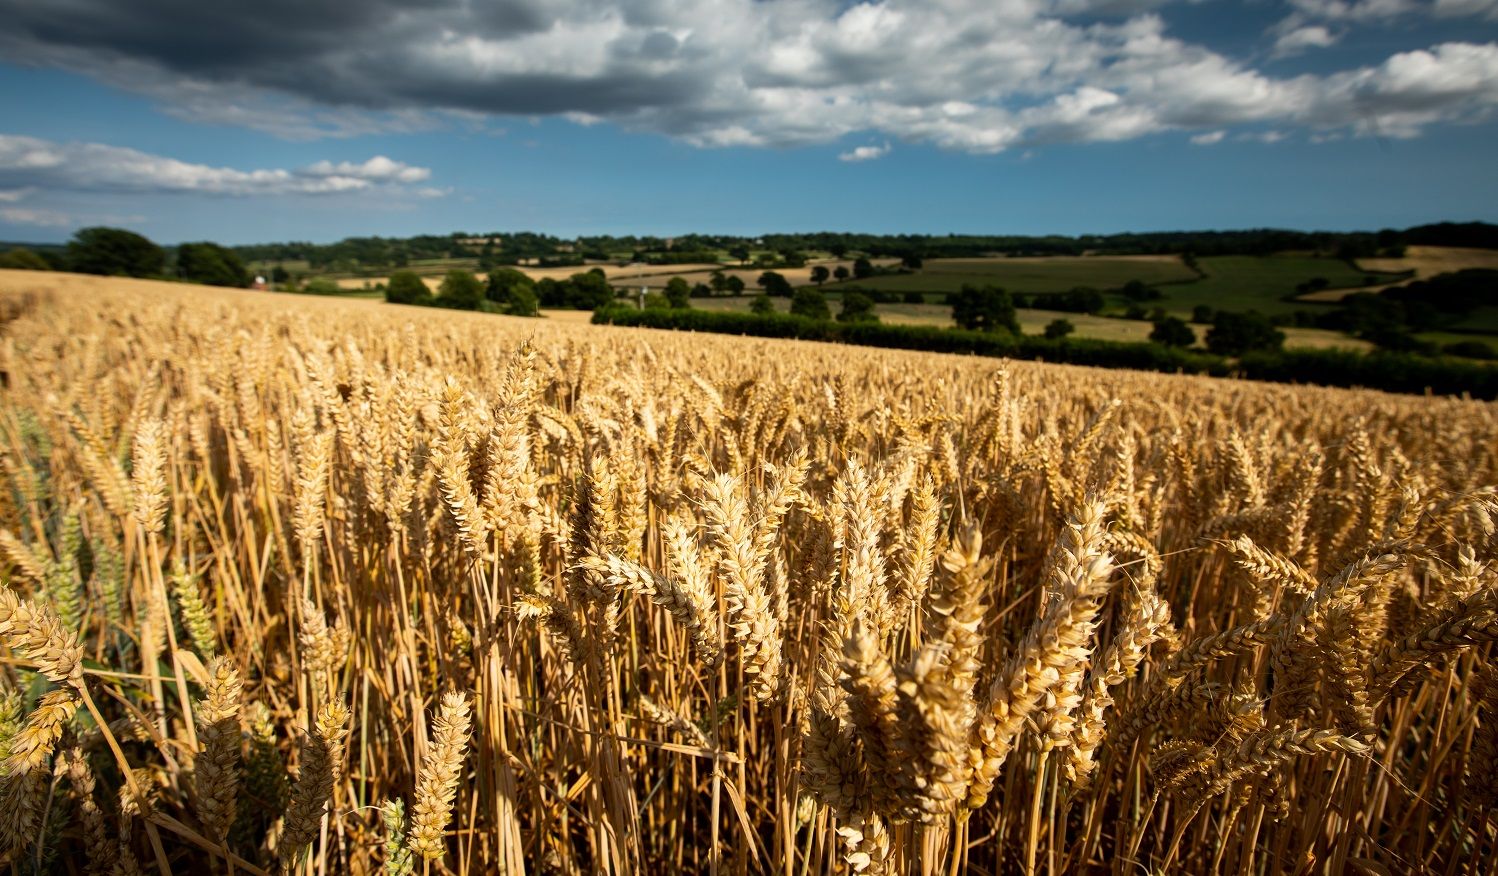 Image of a wheat field near the Rother river